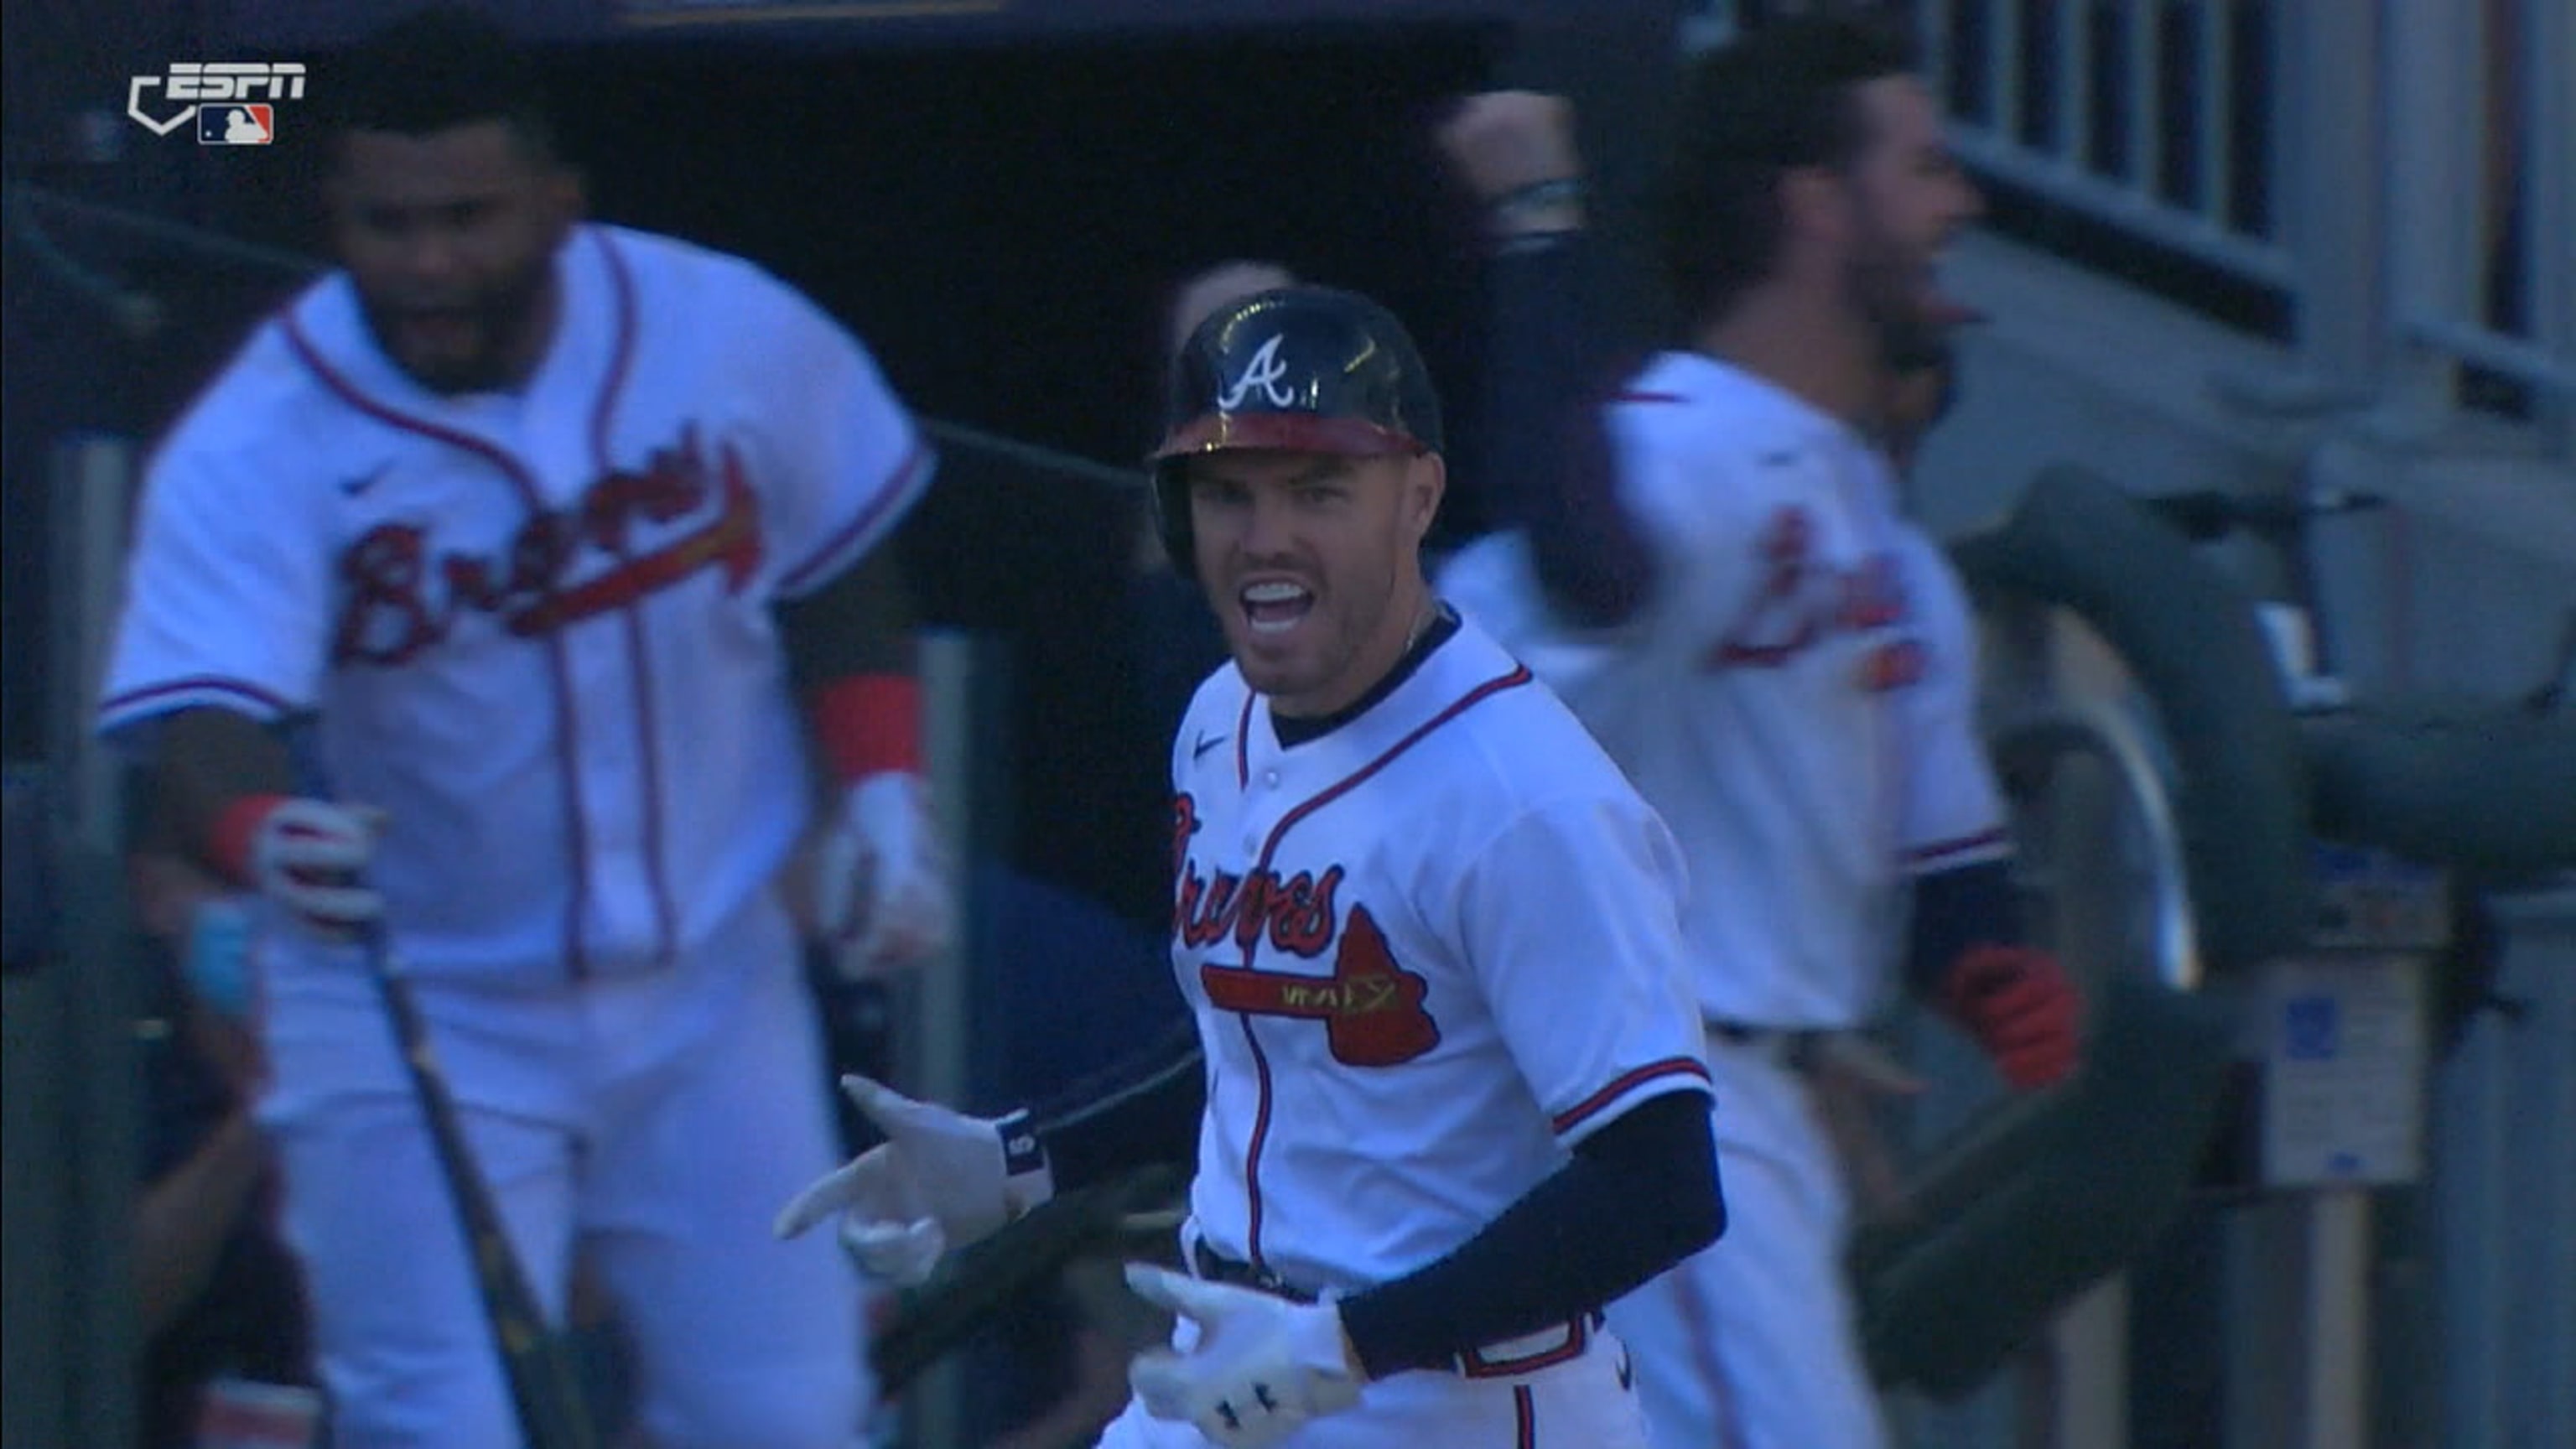 2020 Freddie Freeman Ends 13 Inning Contest Walkoff Rbi Topps Now